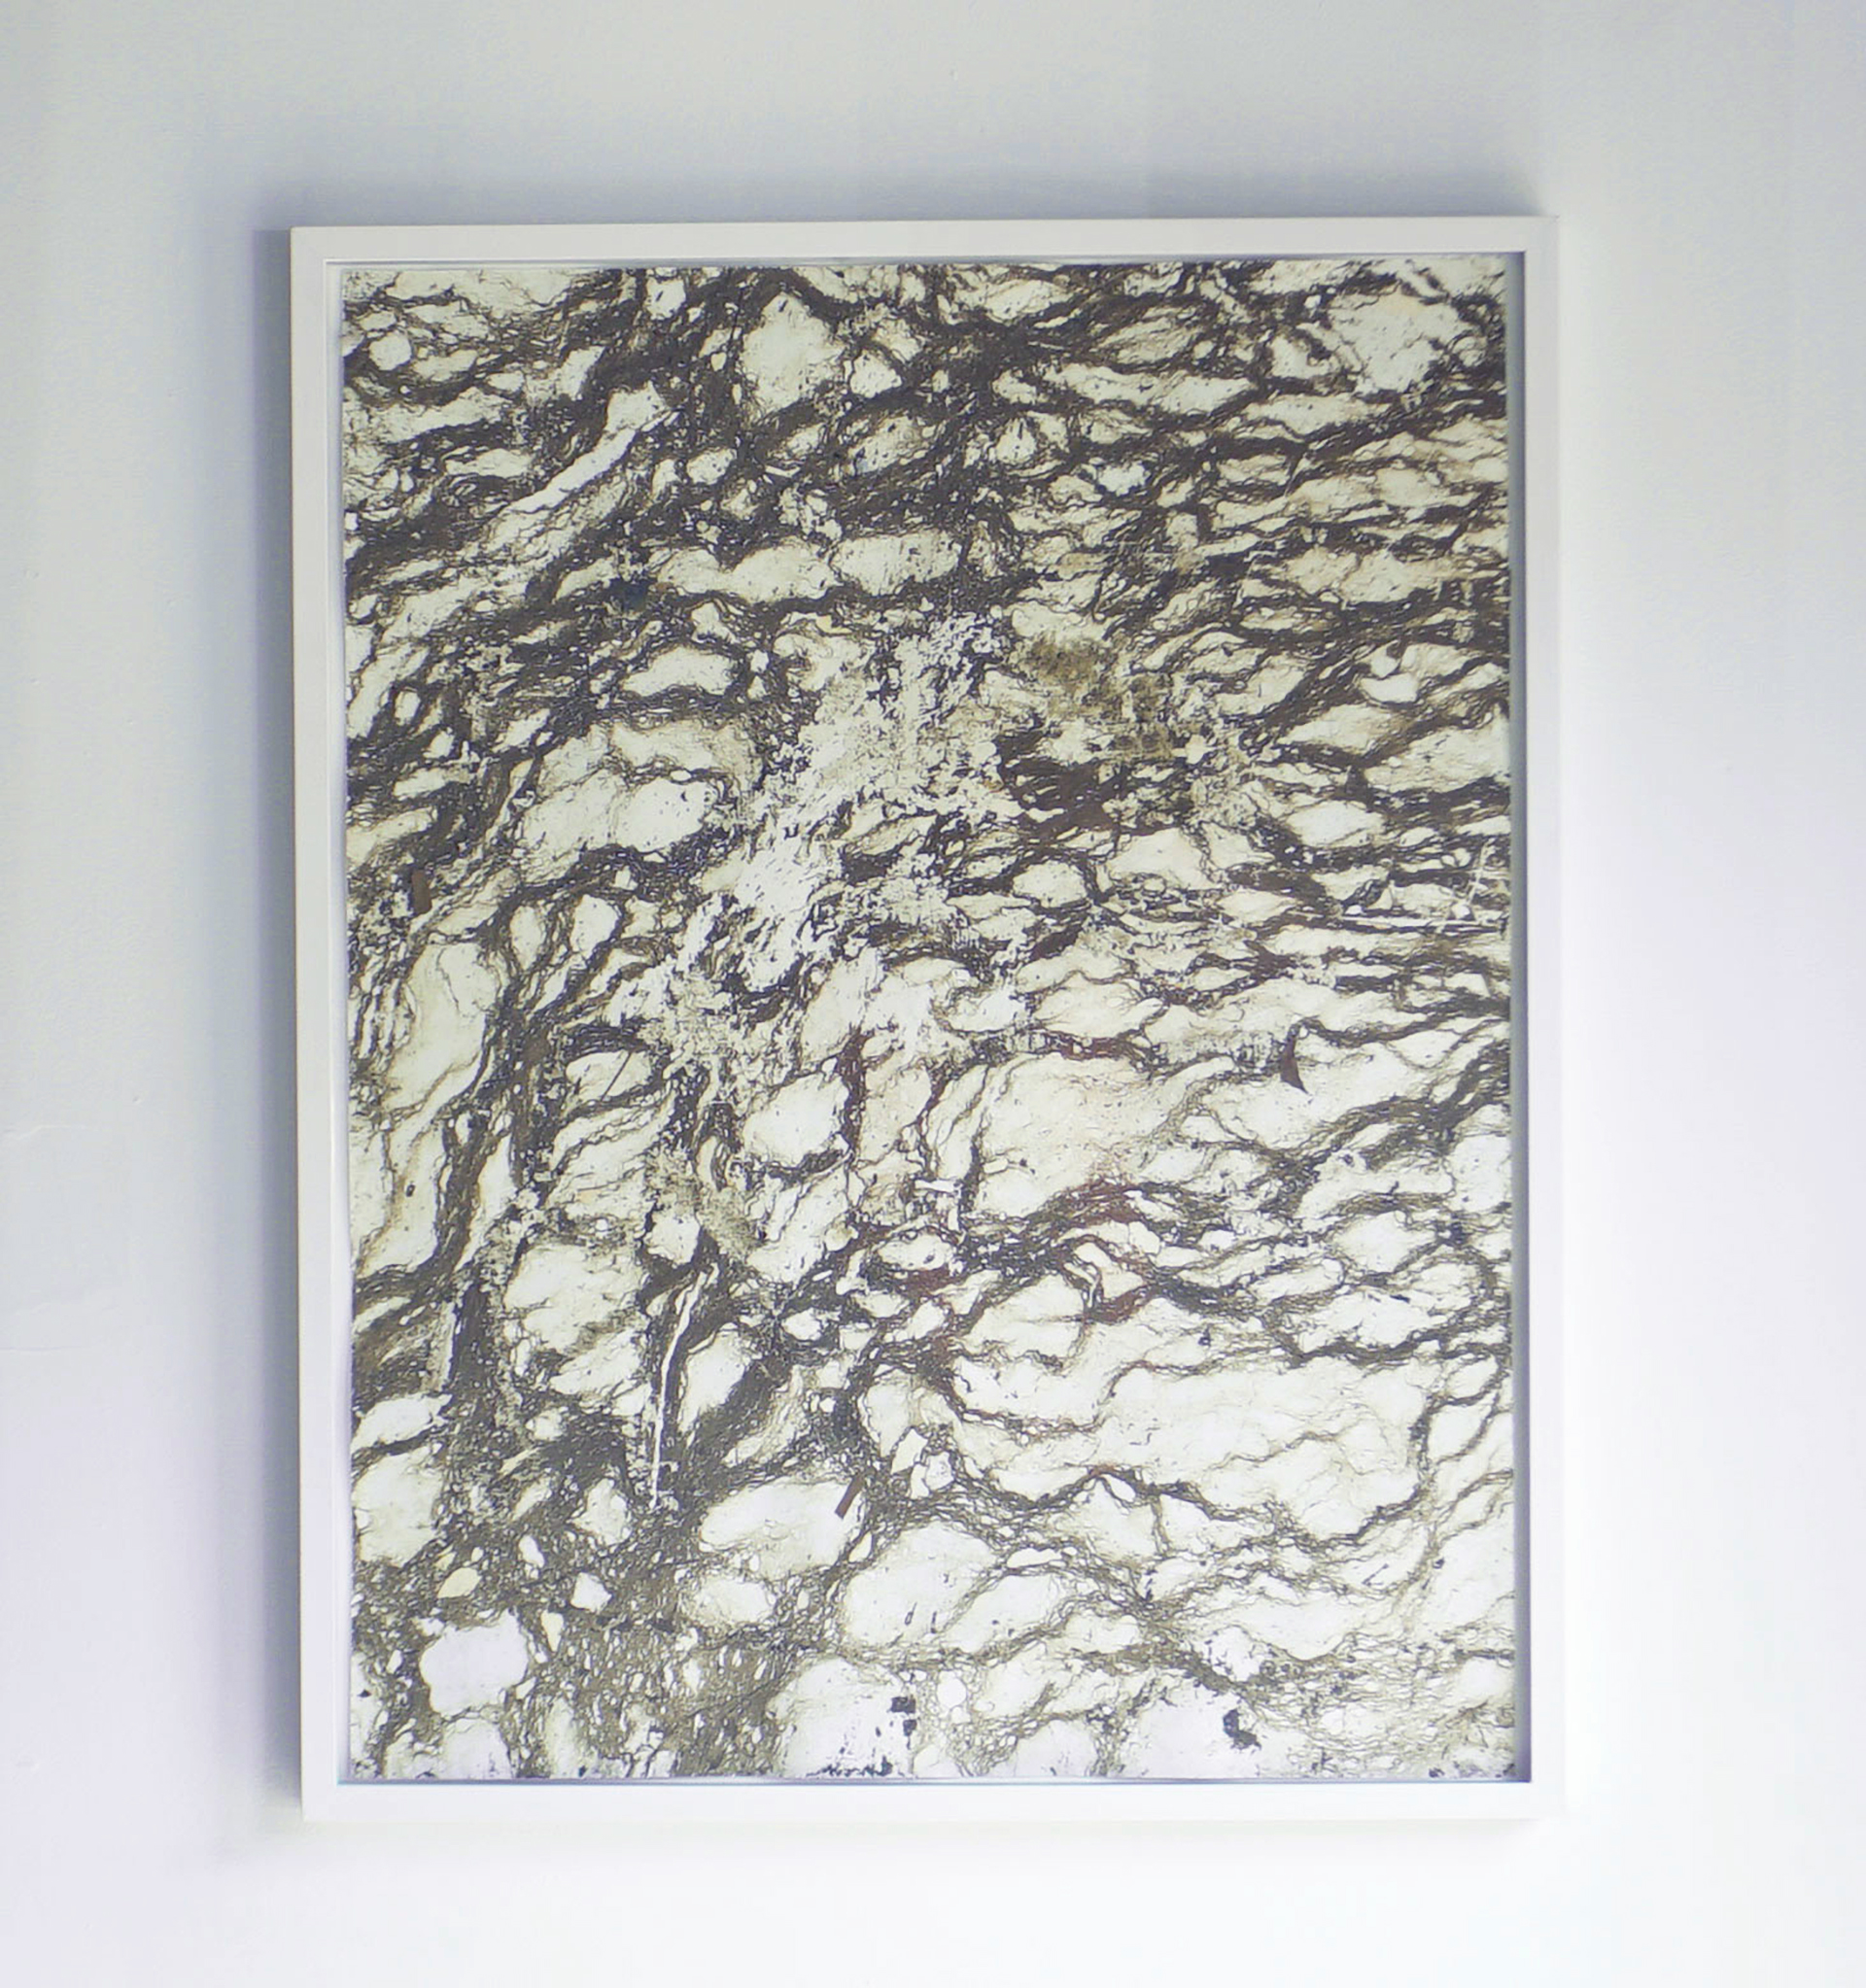 A print evoking algae or seaweed created from the residue of water surface pollution and detritus